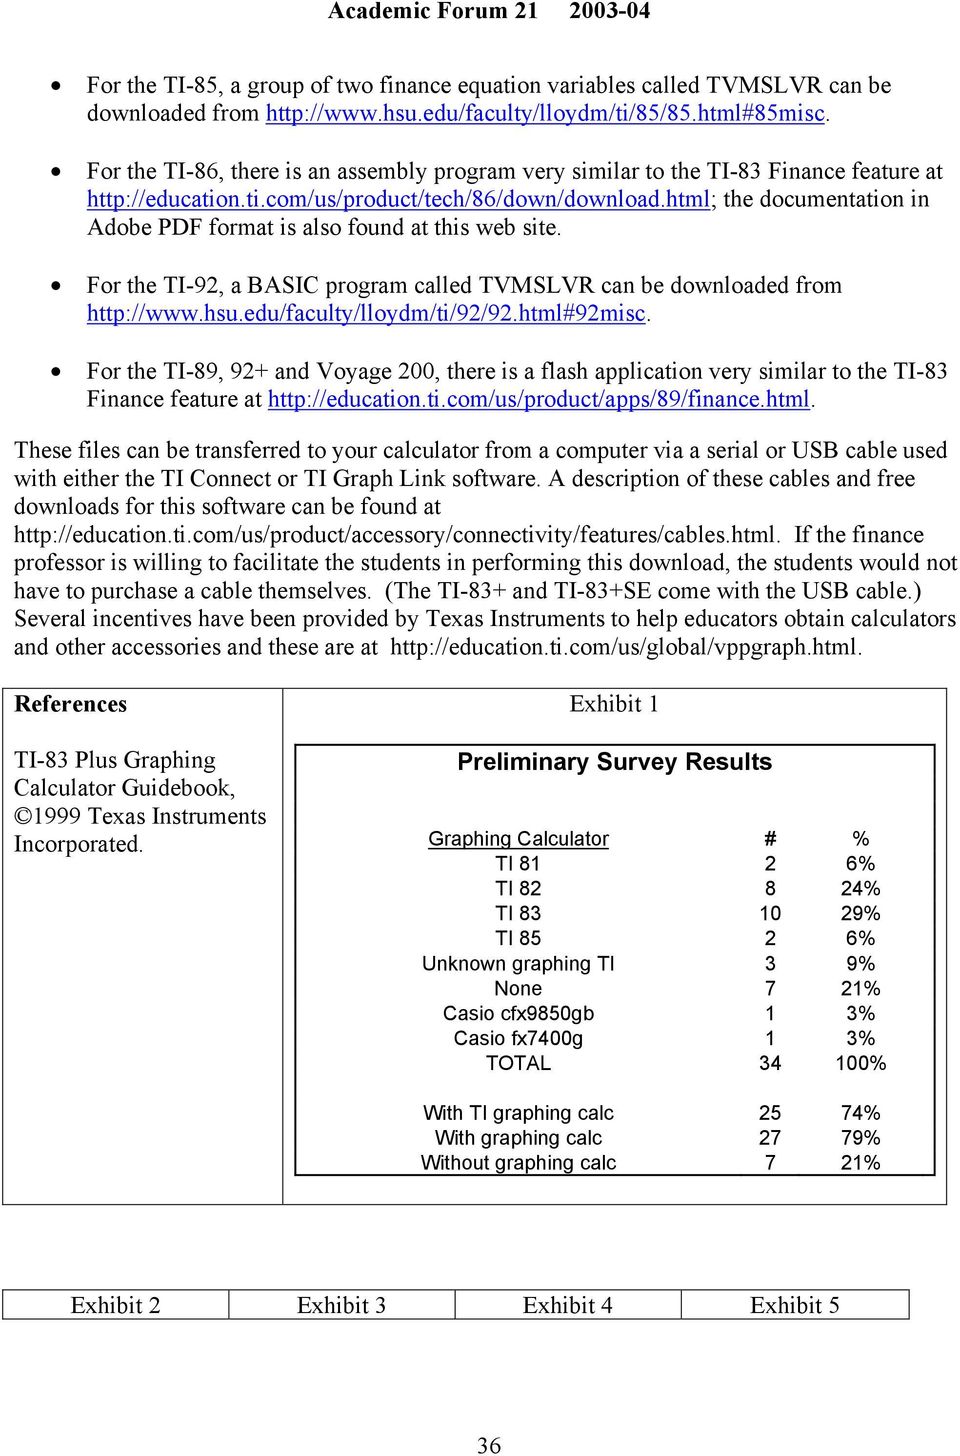 html; the documentation in Adobe PDF format is also found at this web site. For the TI-92, a BASIC program called TVMSLVR can be downloaded from http://www.hsu.edu/faculty/lloydm/ti/92/92.html#92misc.